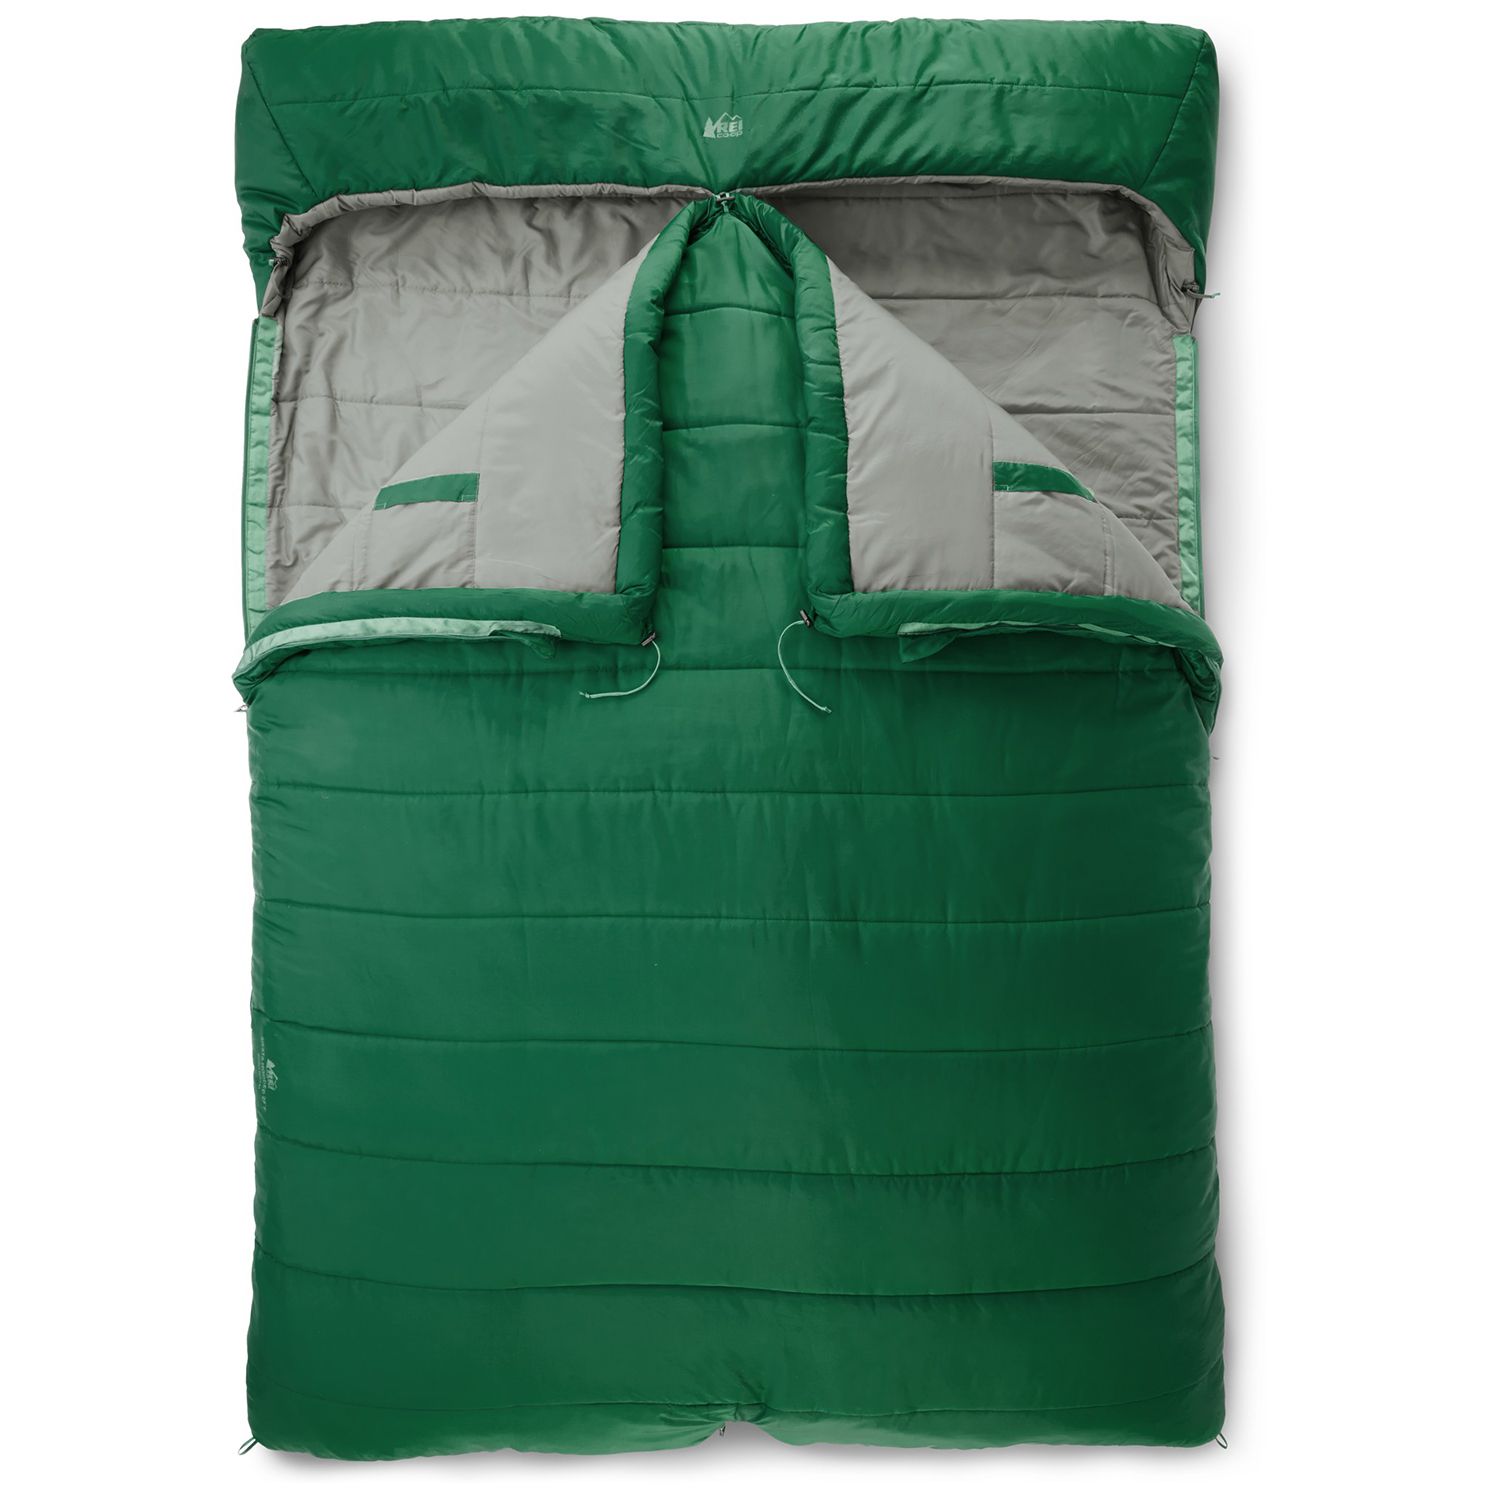 REI Siesta Hooded 20 Sleeping Bag Review – Double The Warmth